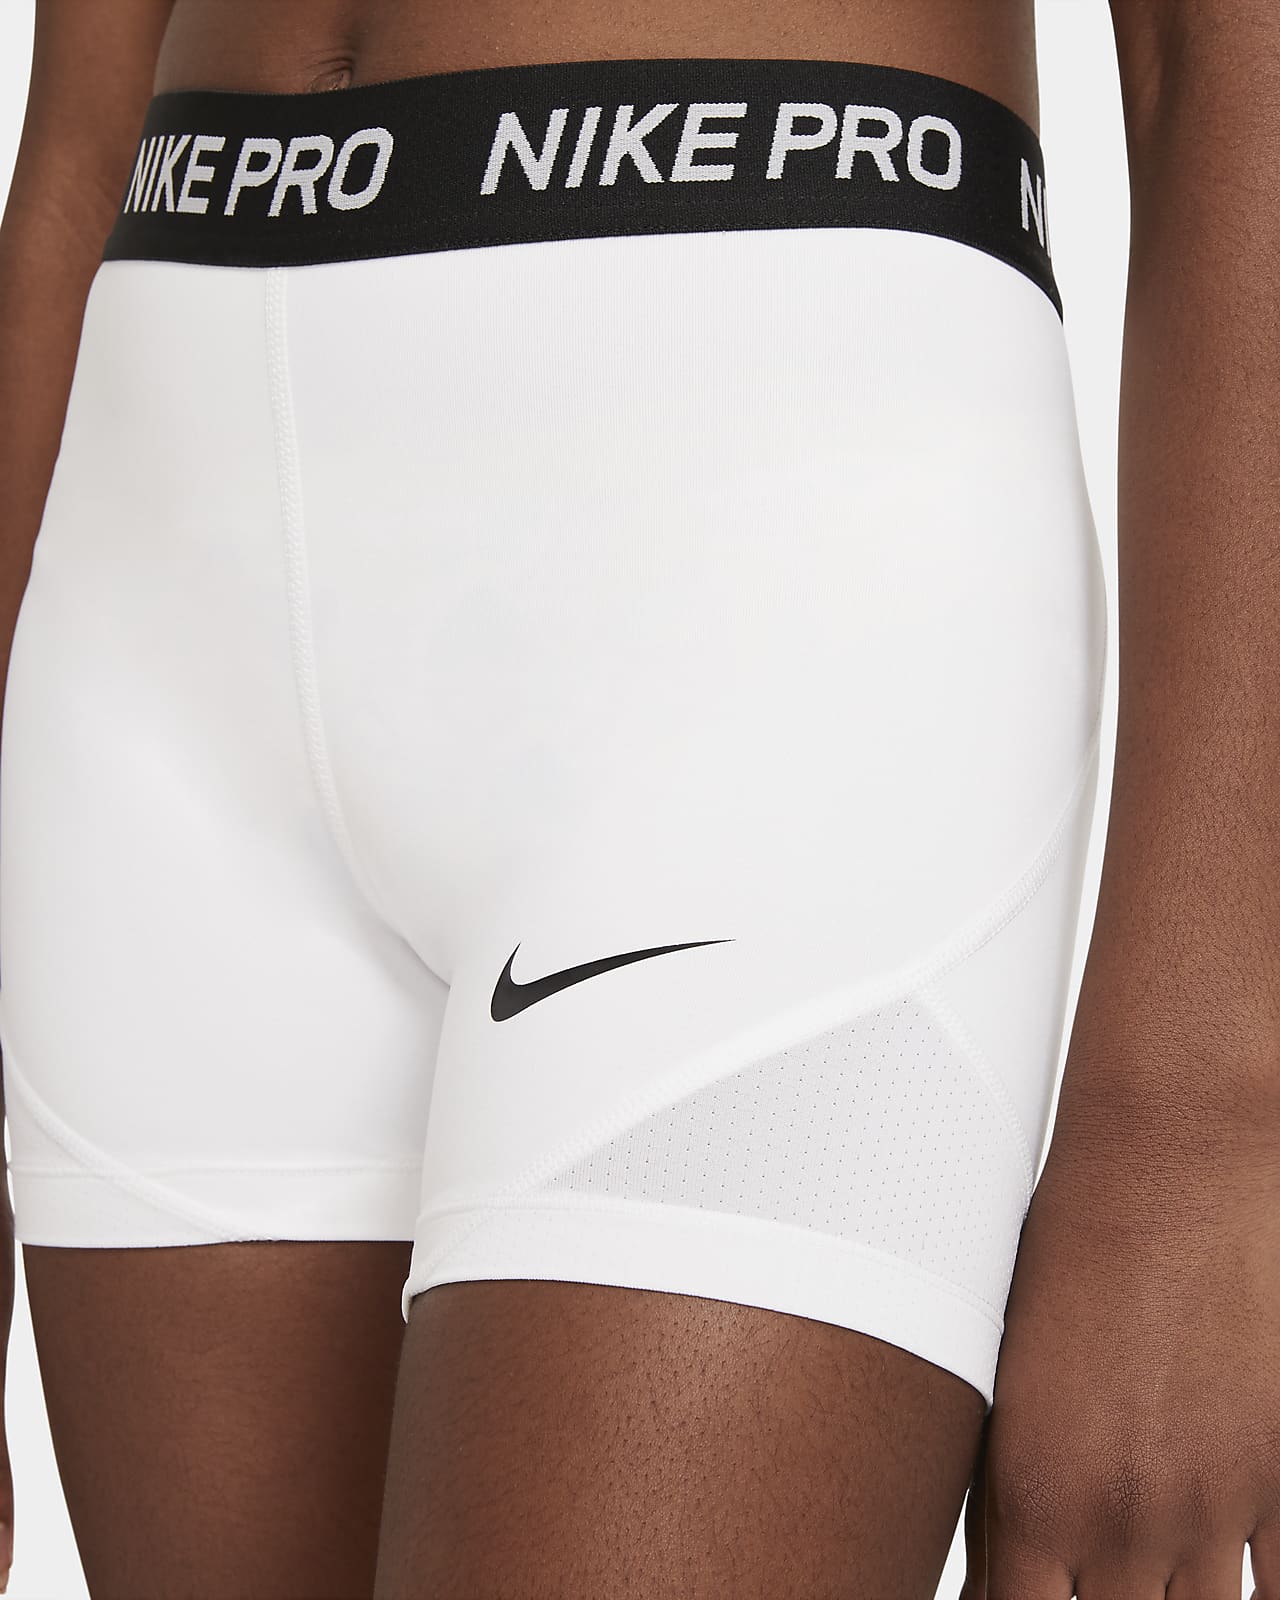 girls with nike pros